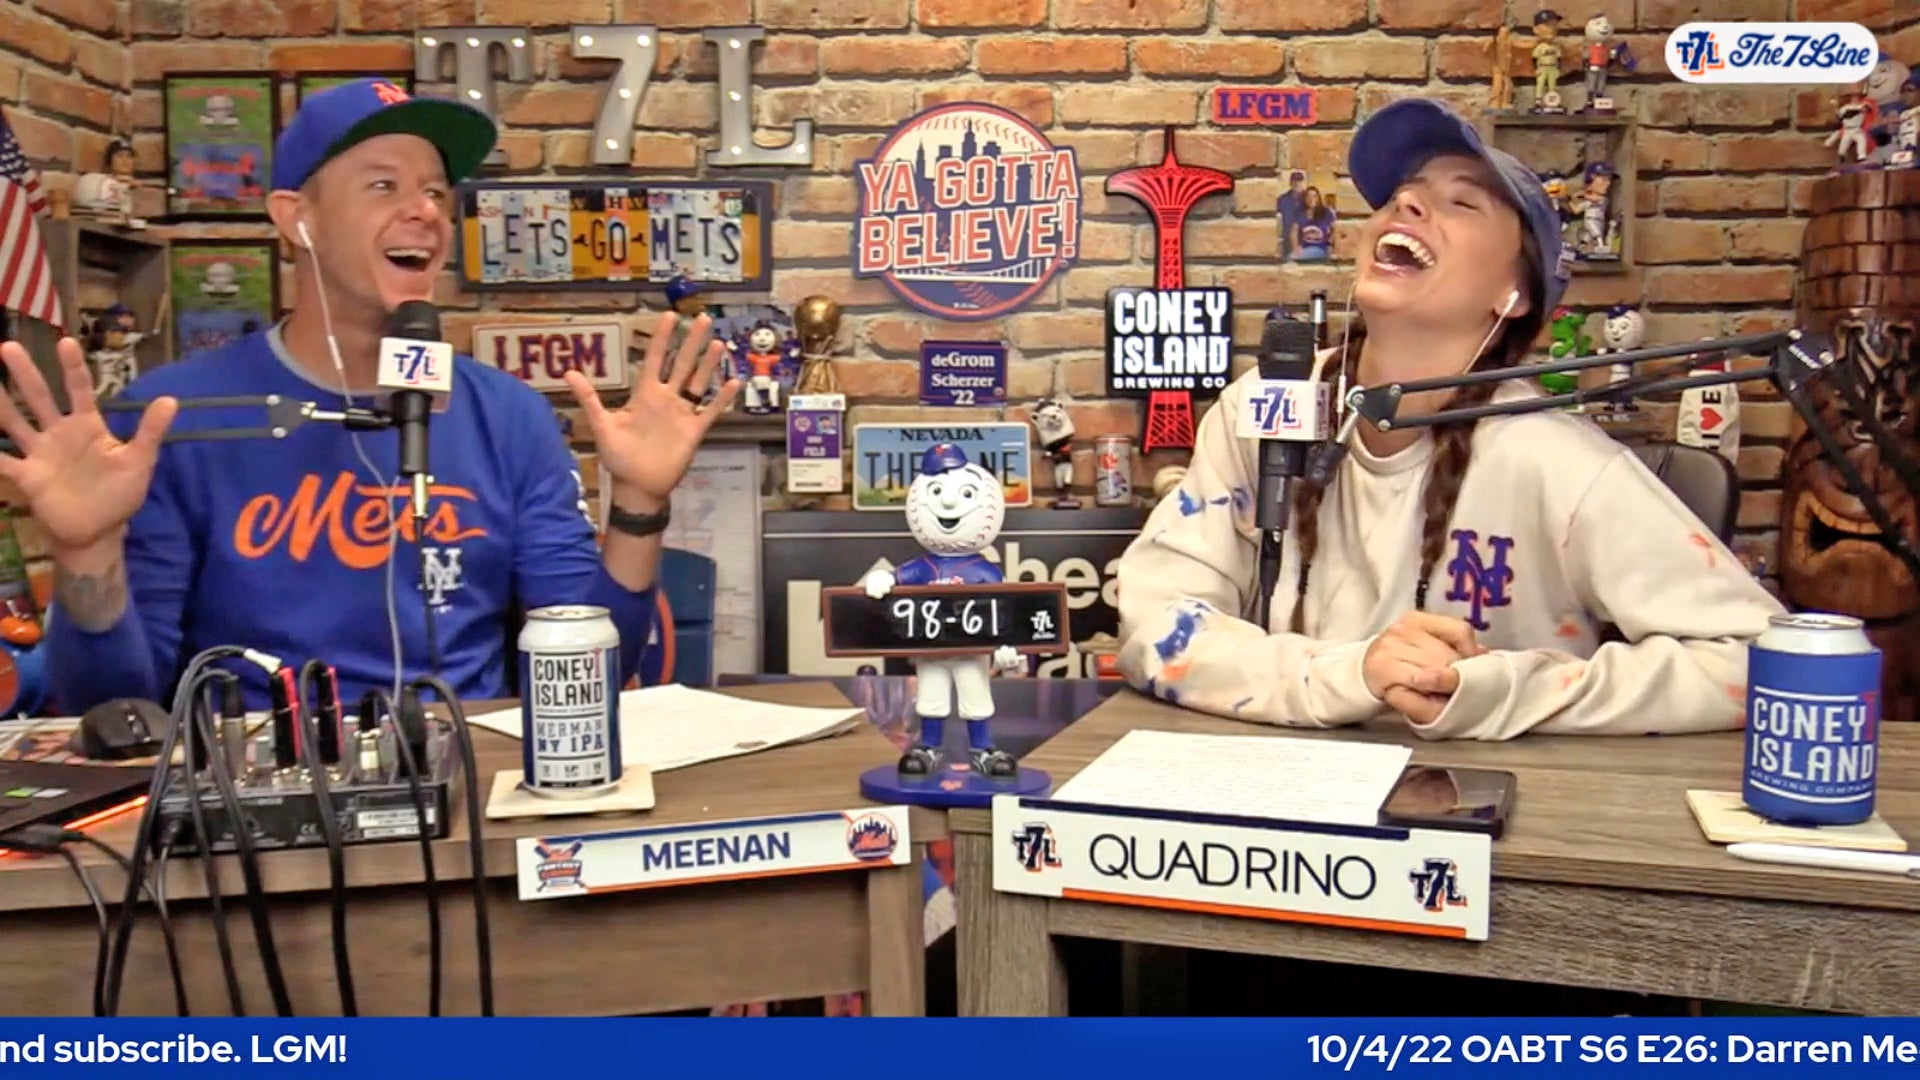 So the New York Mets promo giveaways this year are…. insane